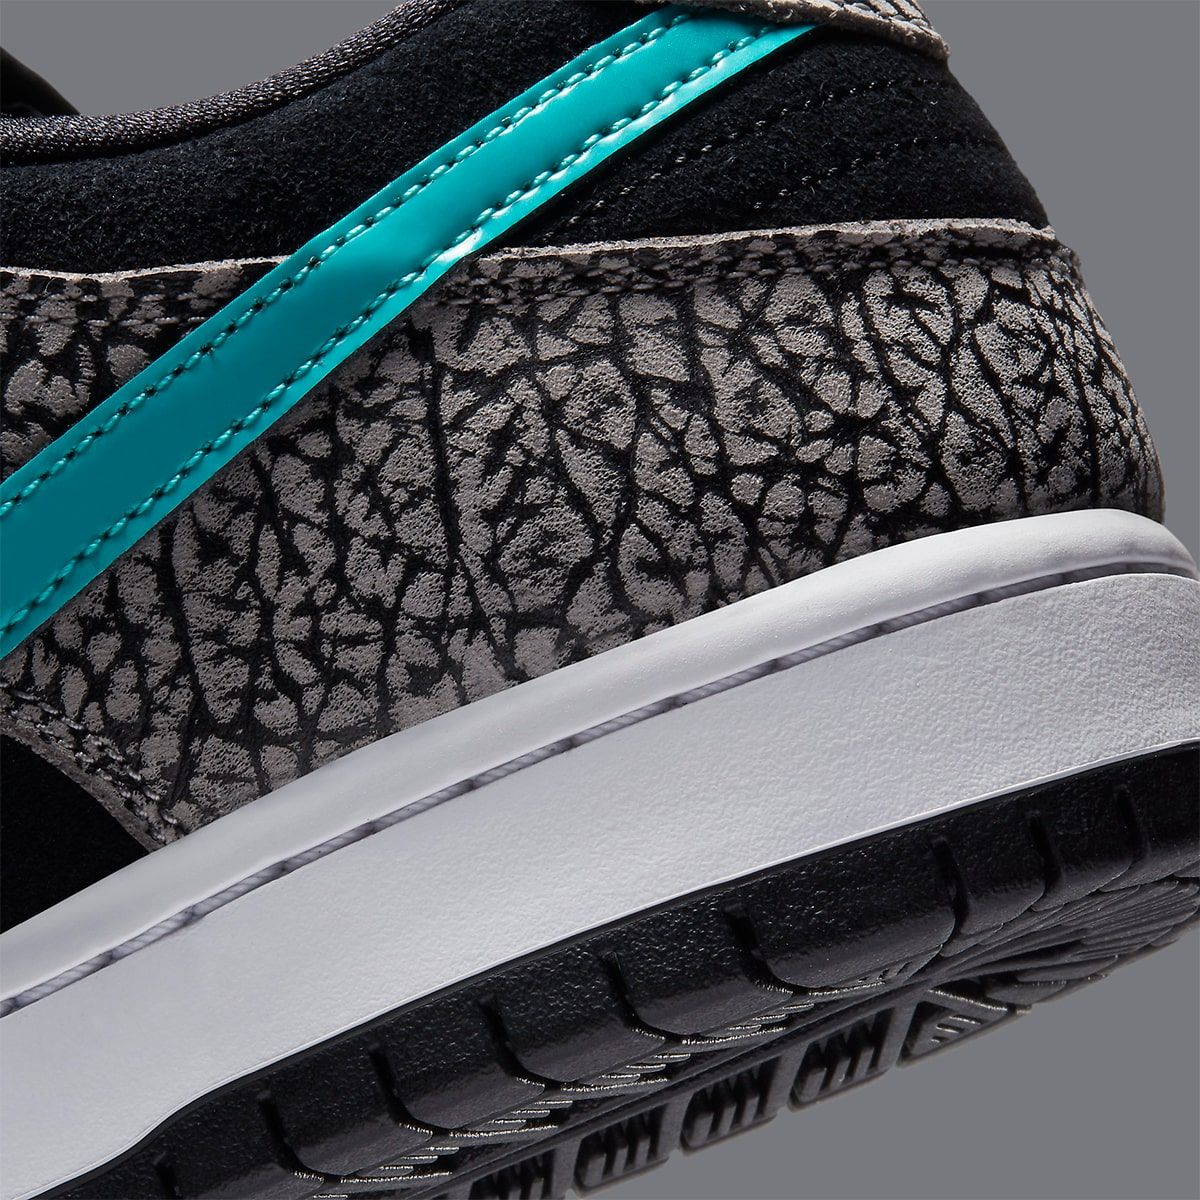 Where to Buy the Nike SB Dunk Low 